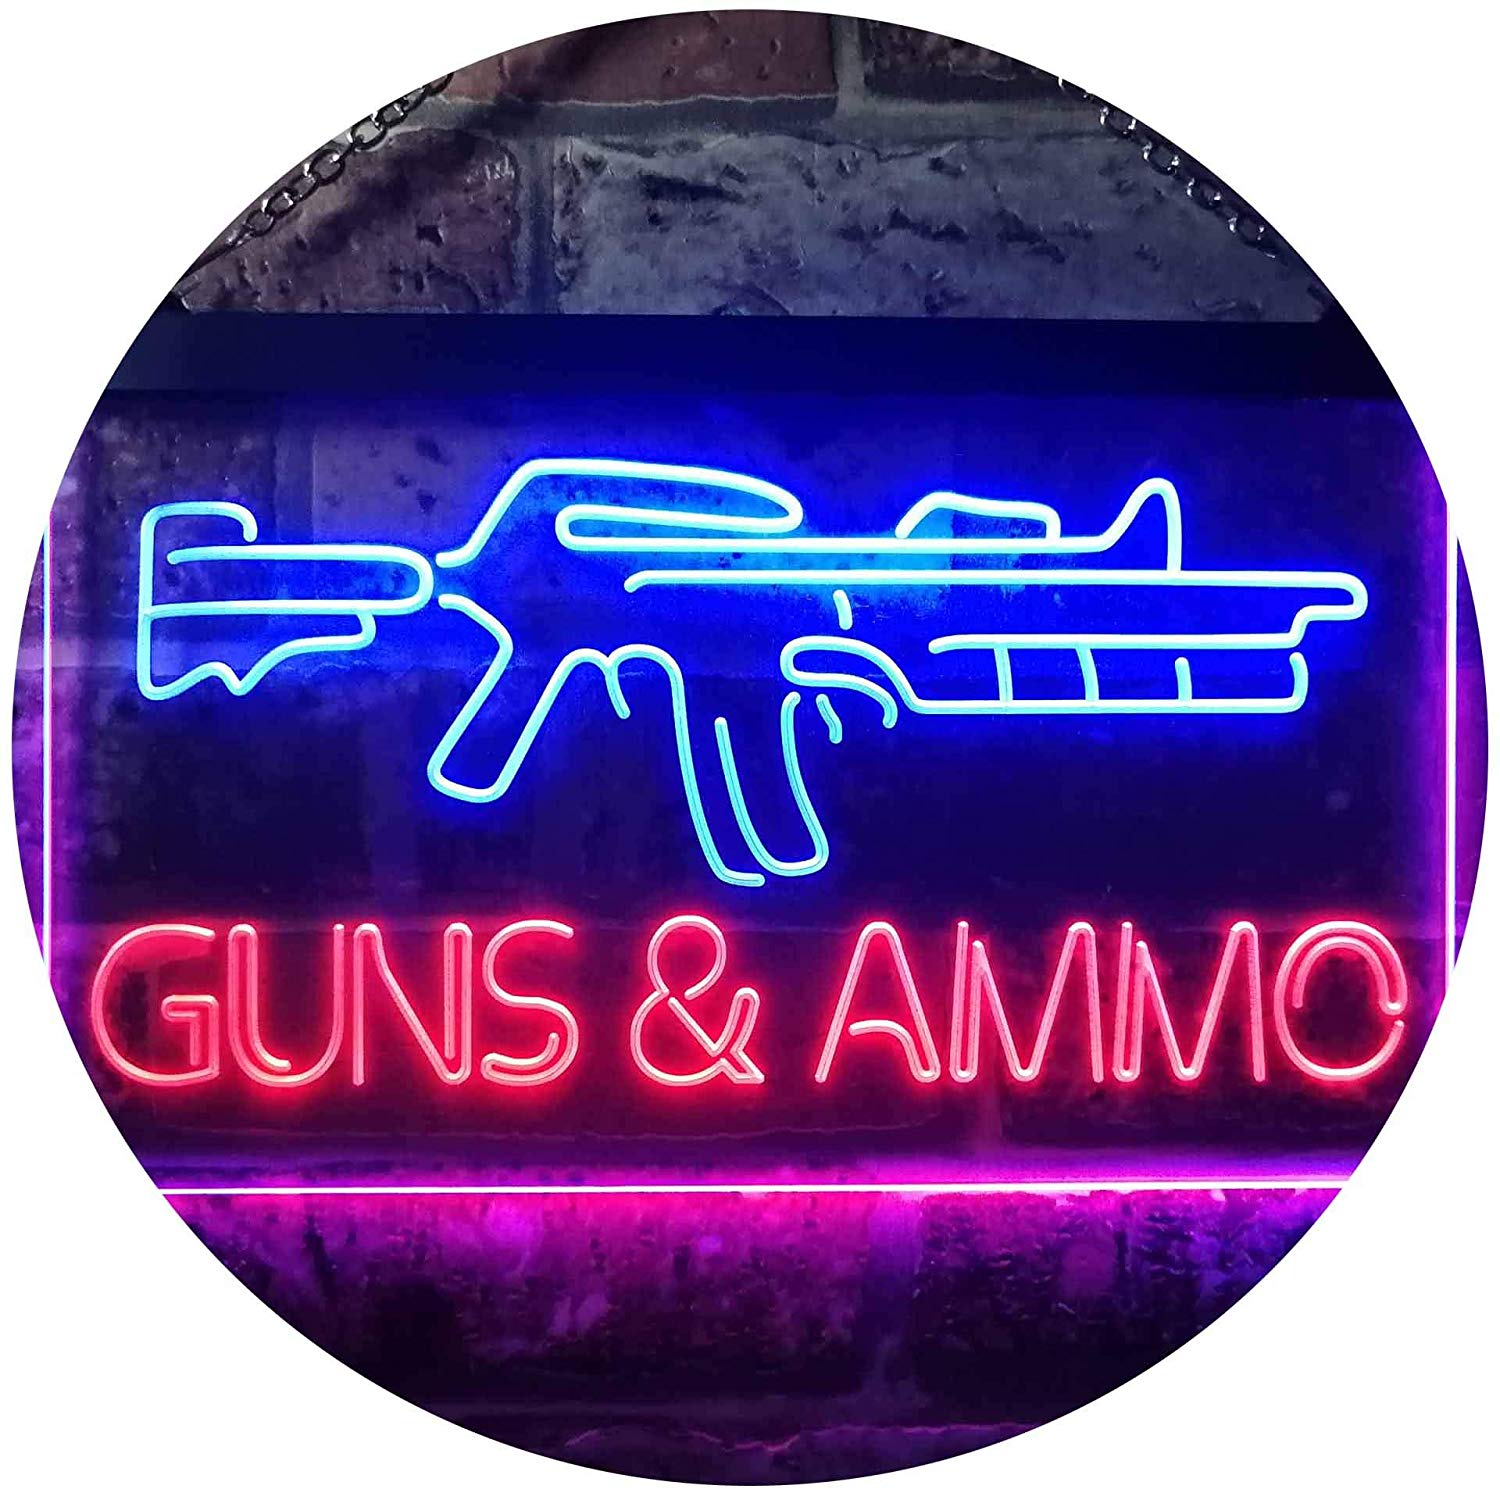 Guns Ammo LED Neon Light Sign - Way Up Gifts